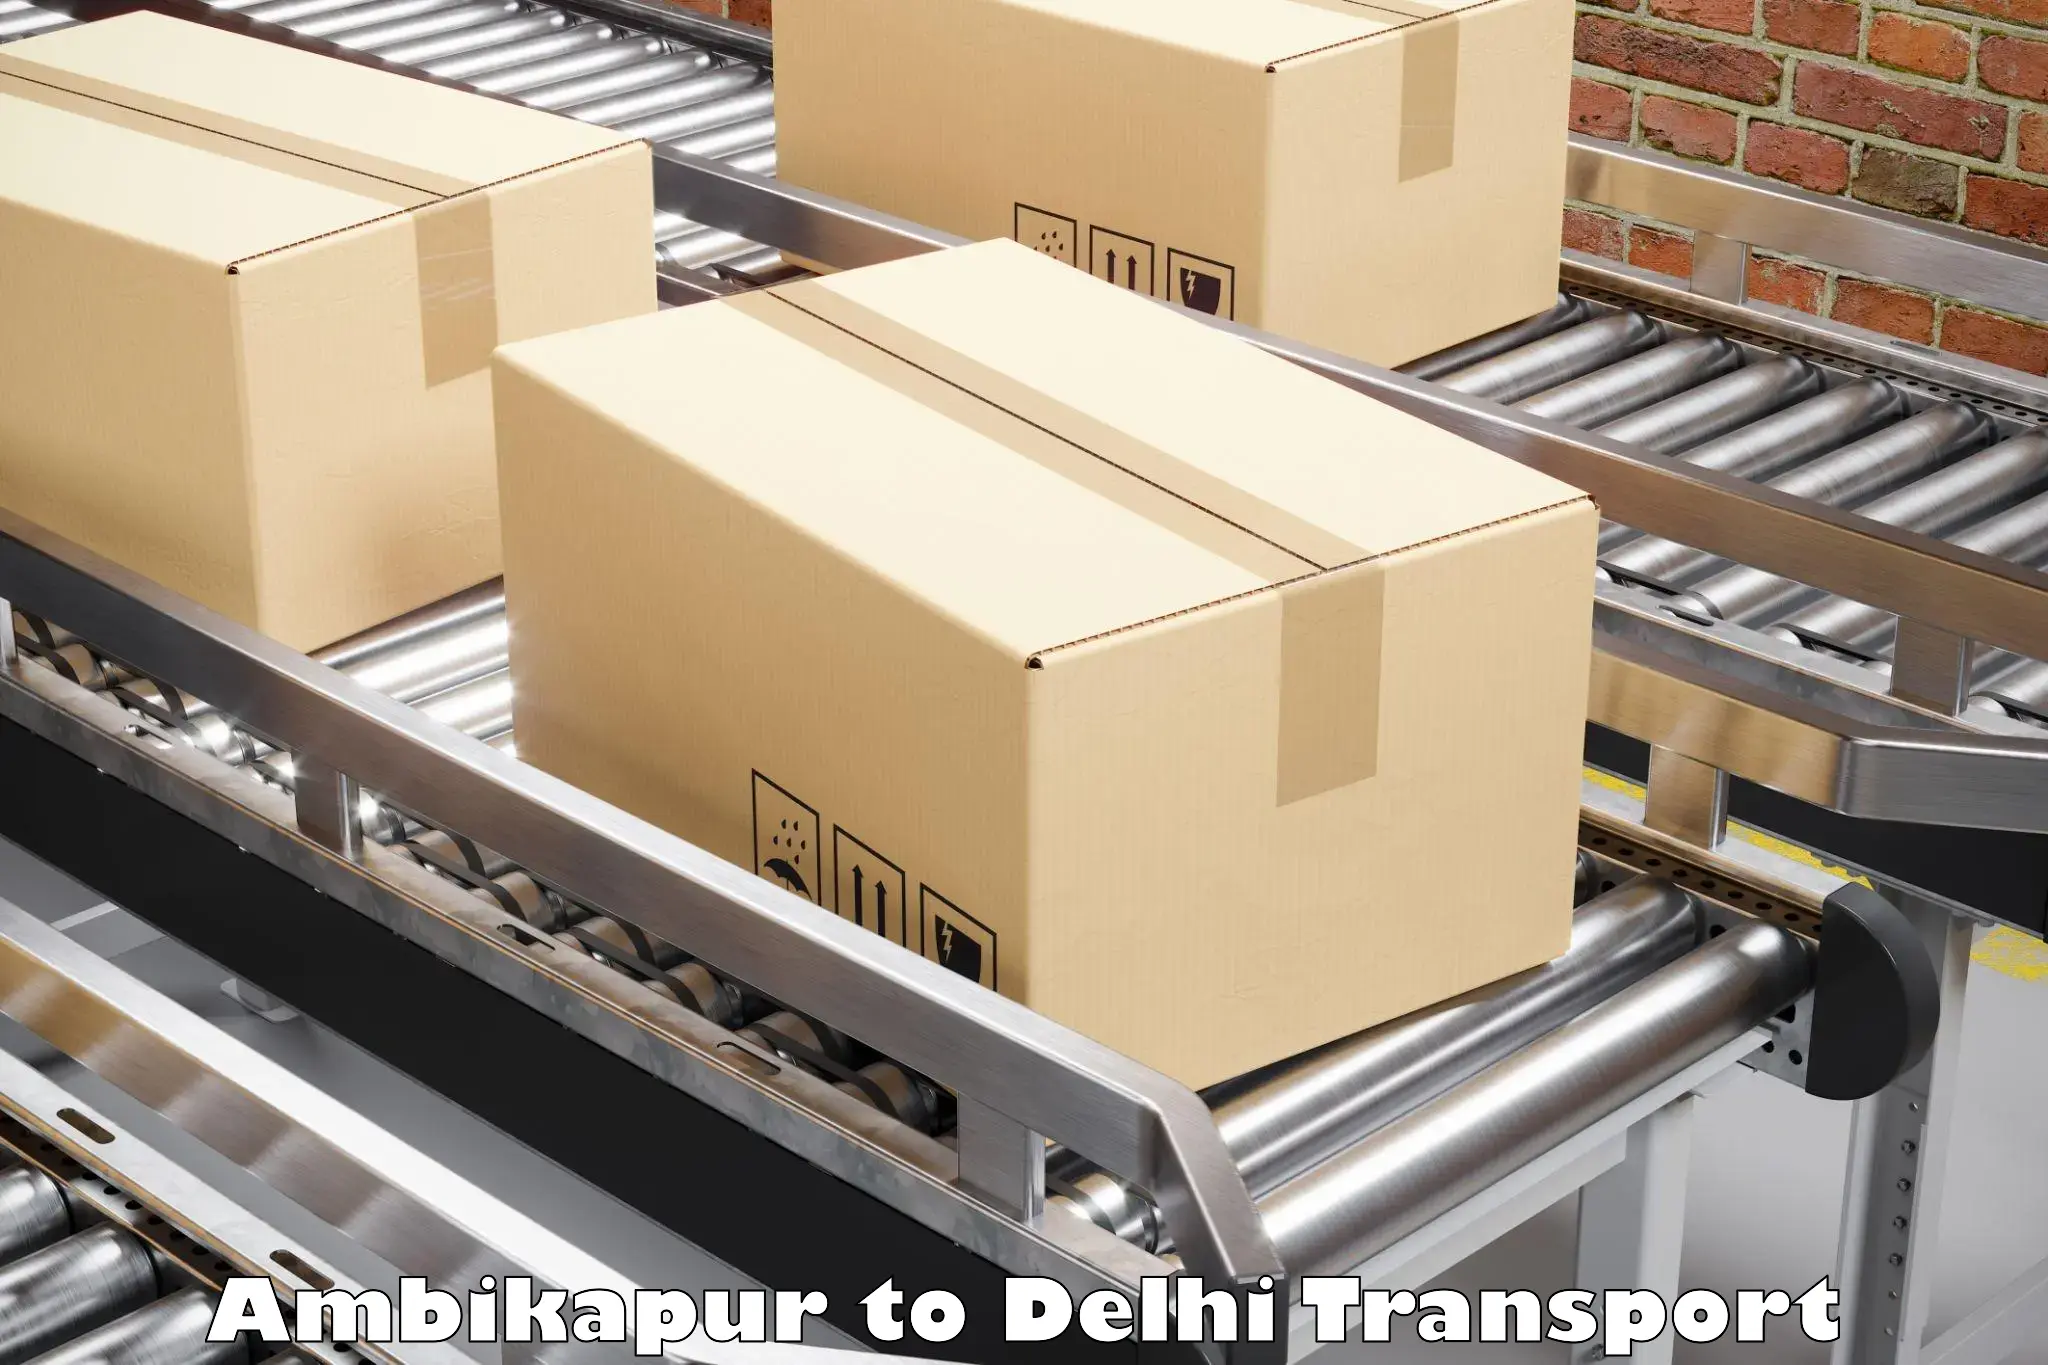 Delivery service Ambikapur to Indraprastha